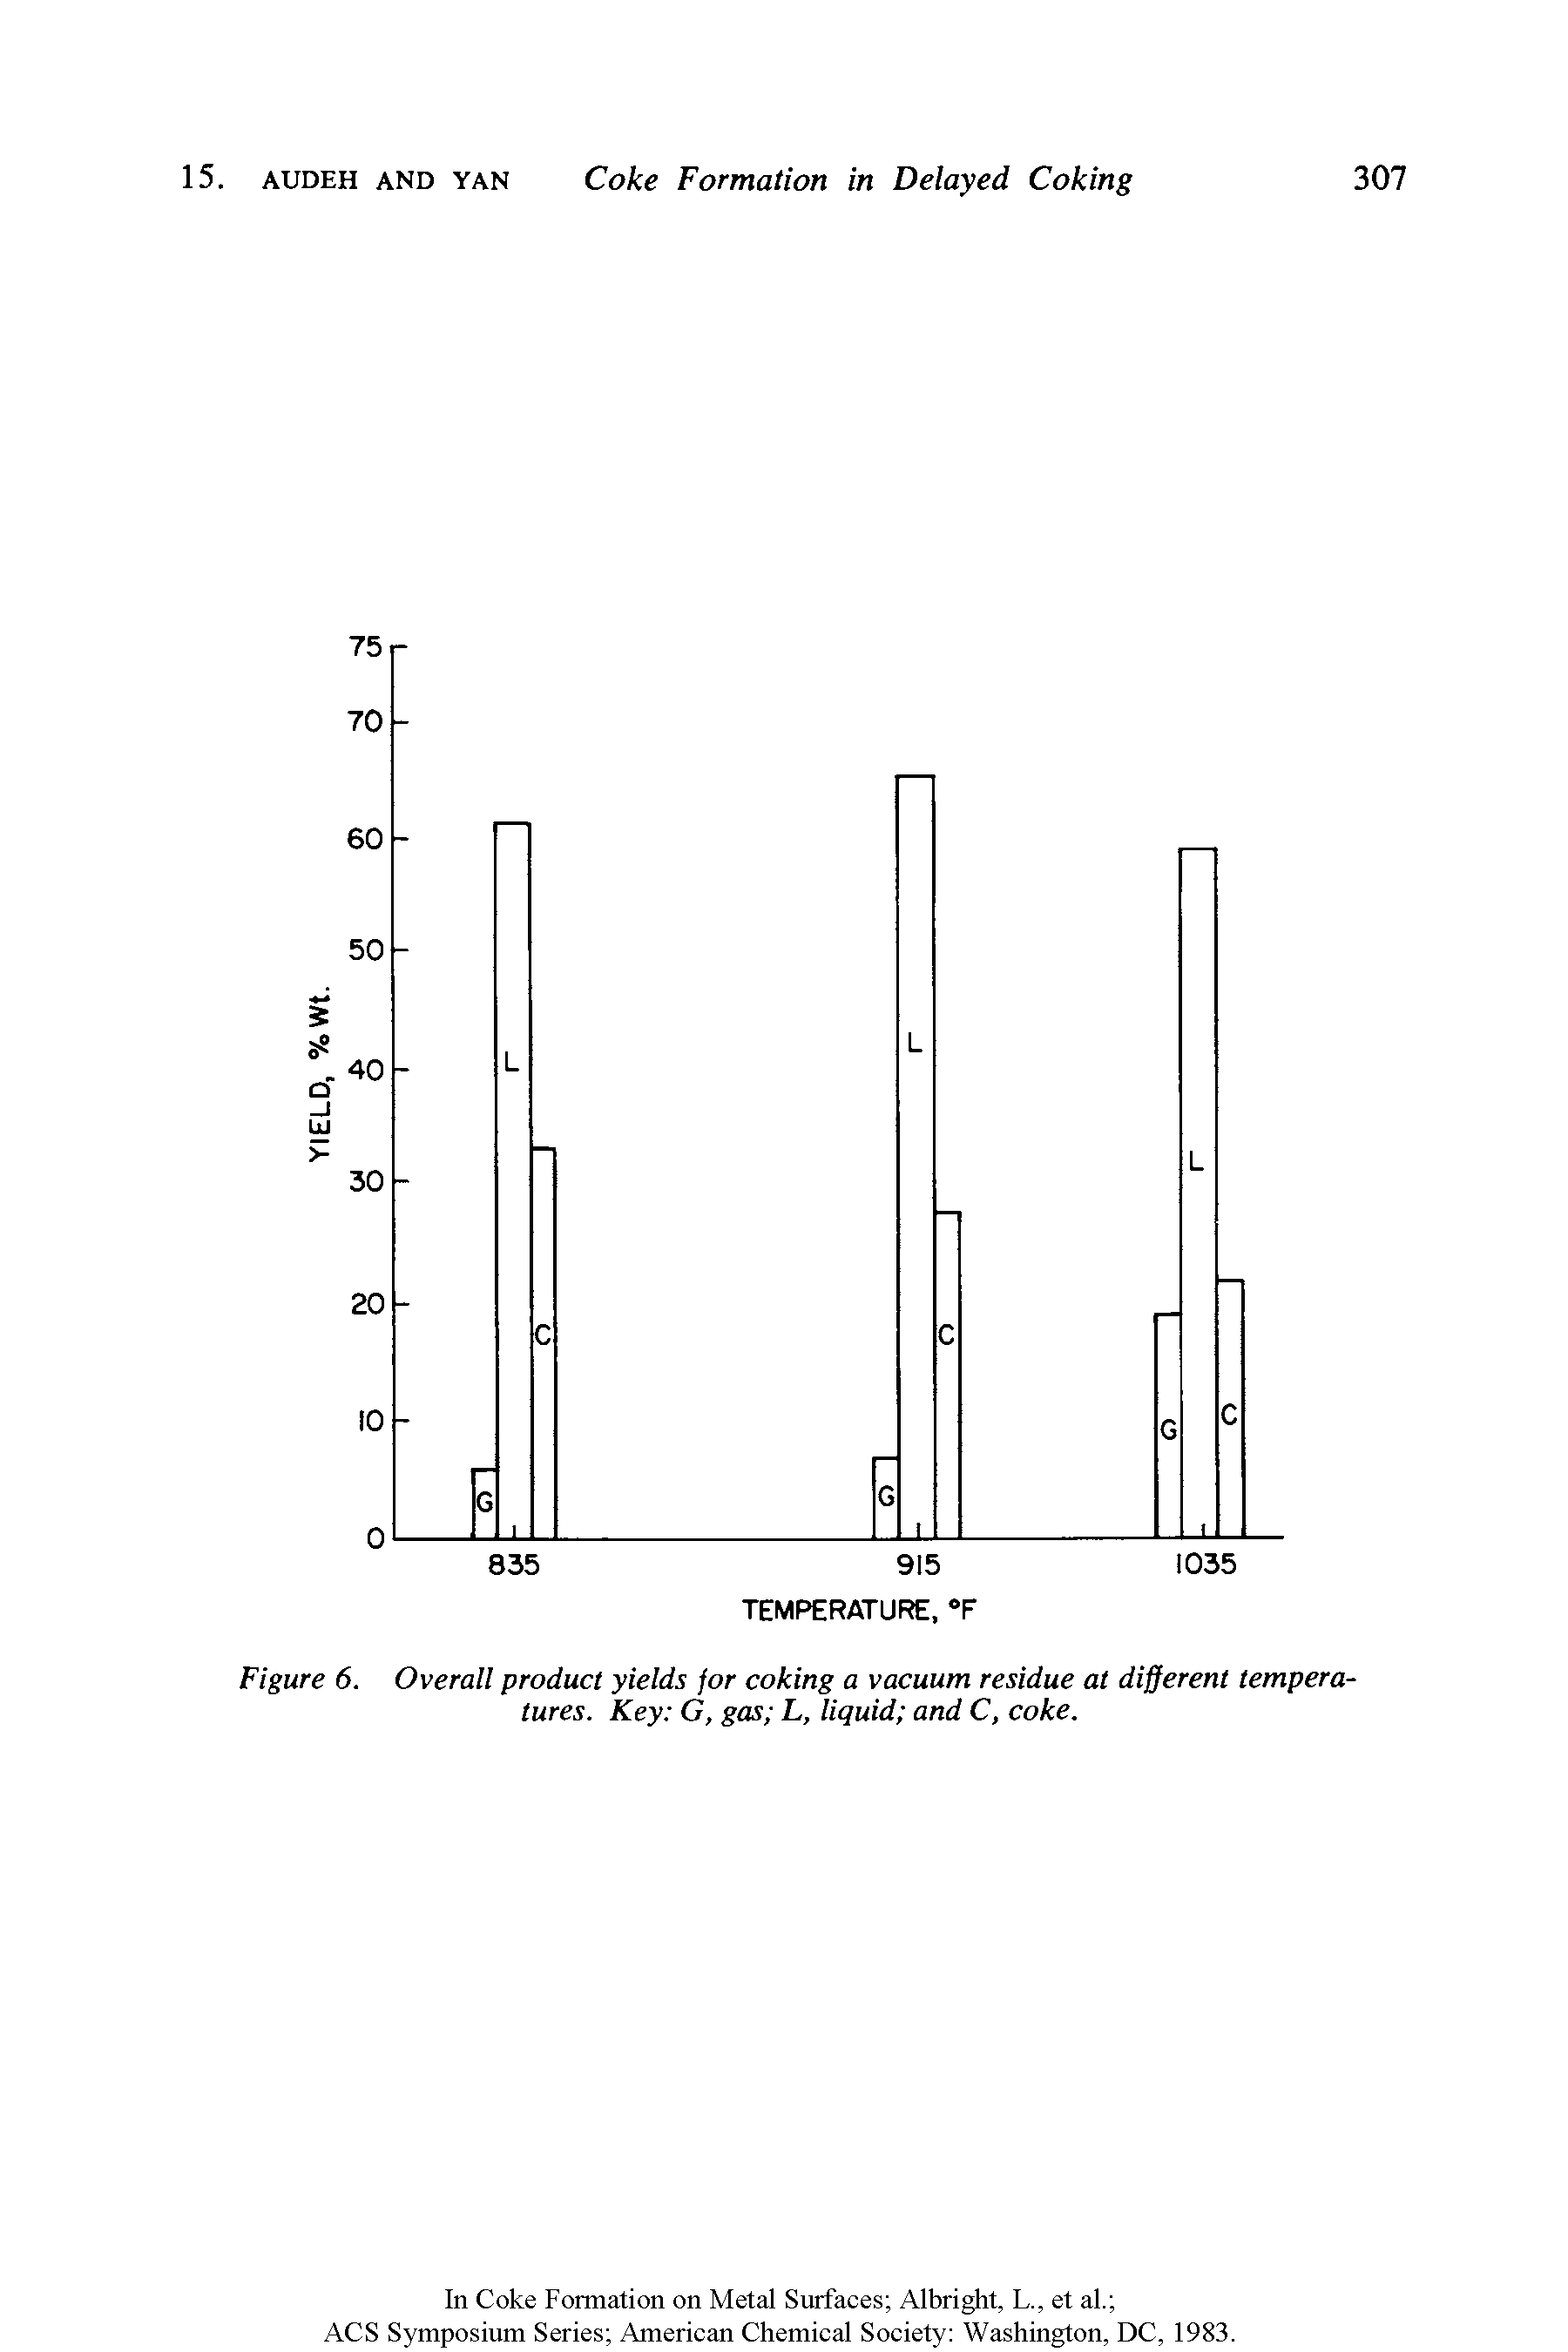 Figure 6. Overall product yields for coking a vacuum residue at different temperatures. Key G, gas L, liquid and C, coke.